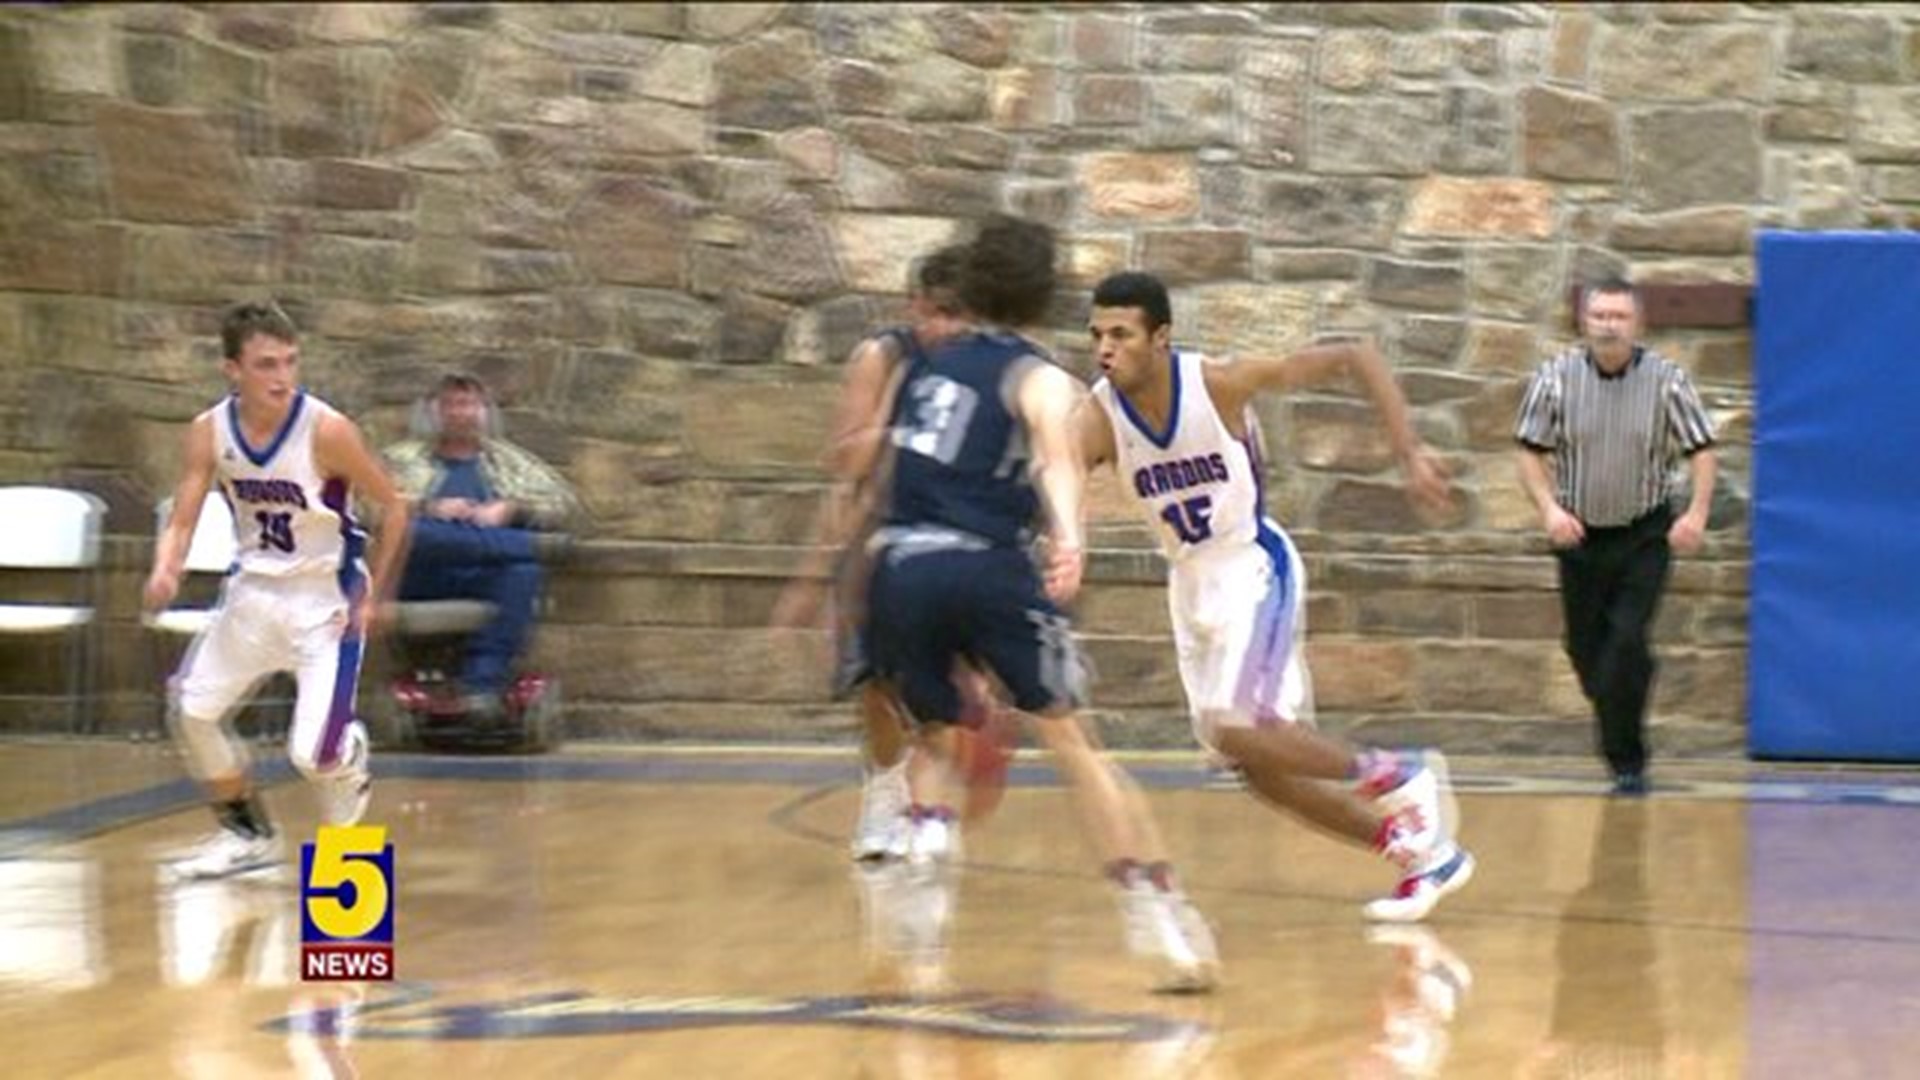 Matlock`s Leadership Helps Mountainburg Excel On The Court